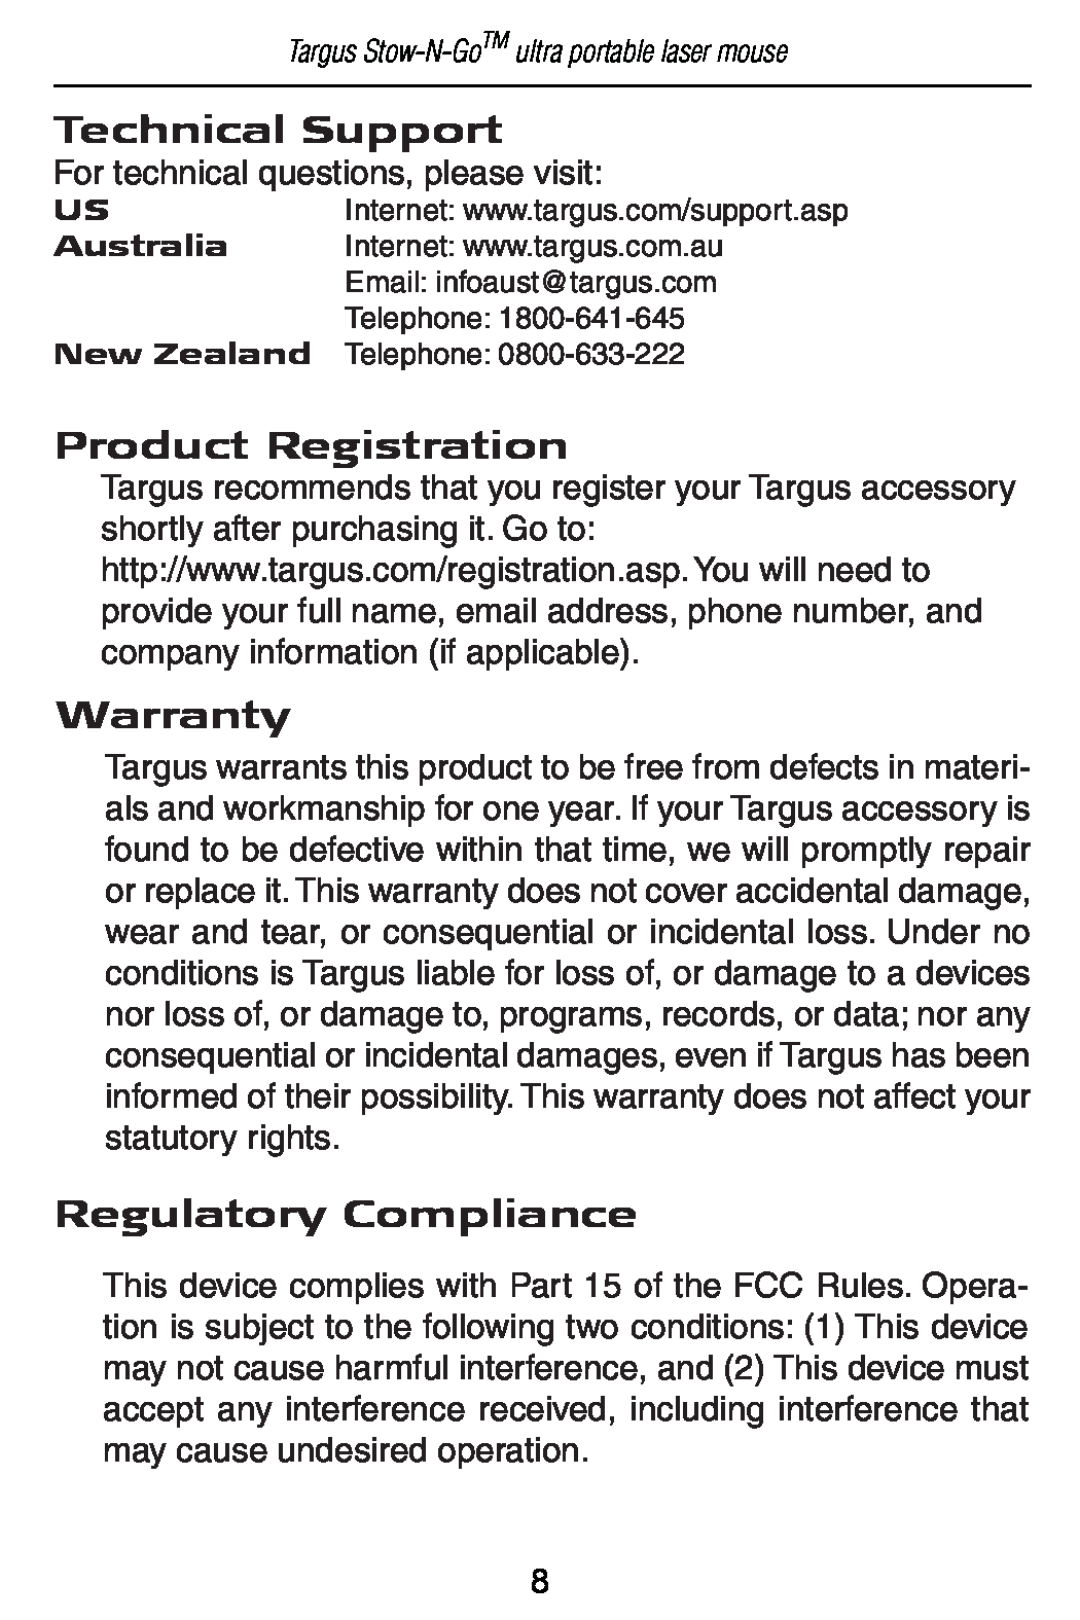 Targus AMU22US specifications Technical Support, Product Registration, Warranty, Regulatory Compliance 